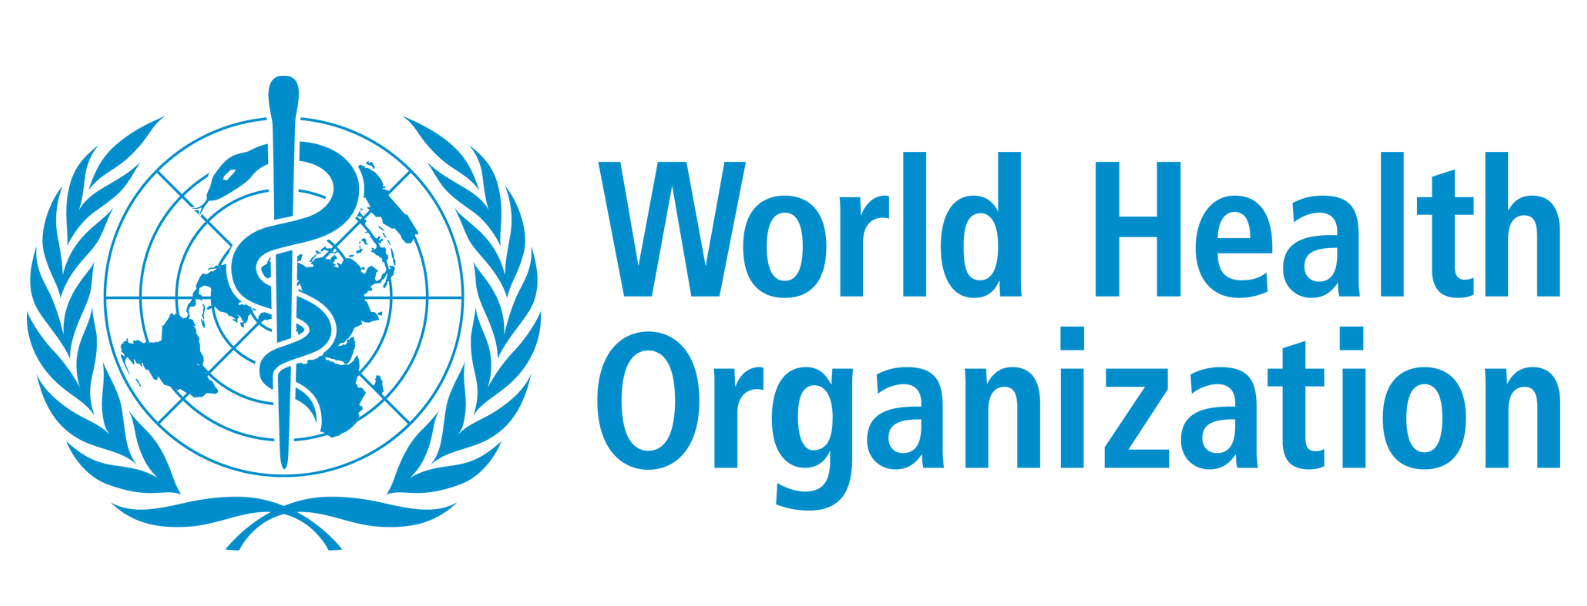 Landmark global strategy on oral health adopted at World Health Assembly 75